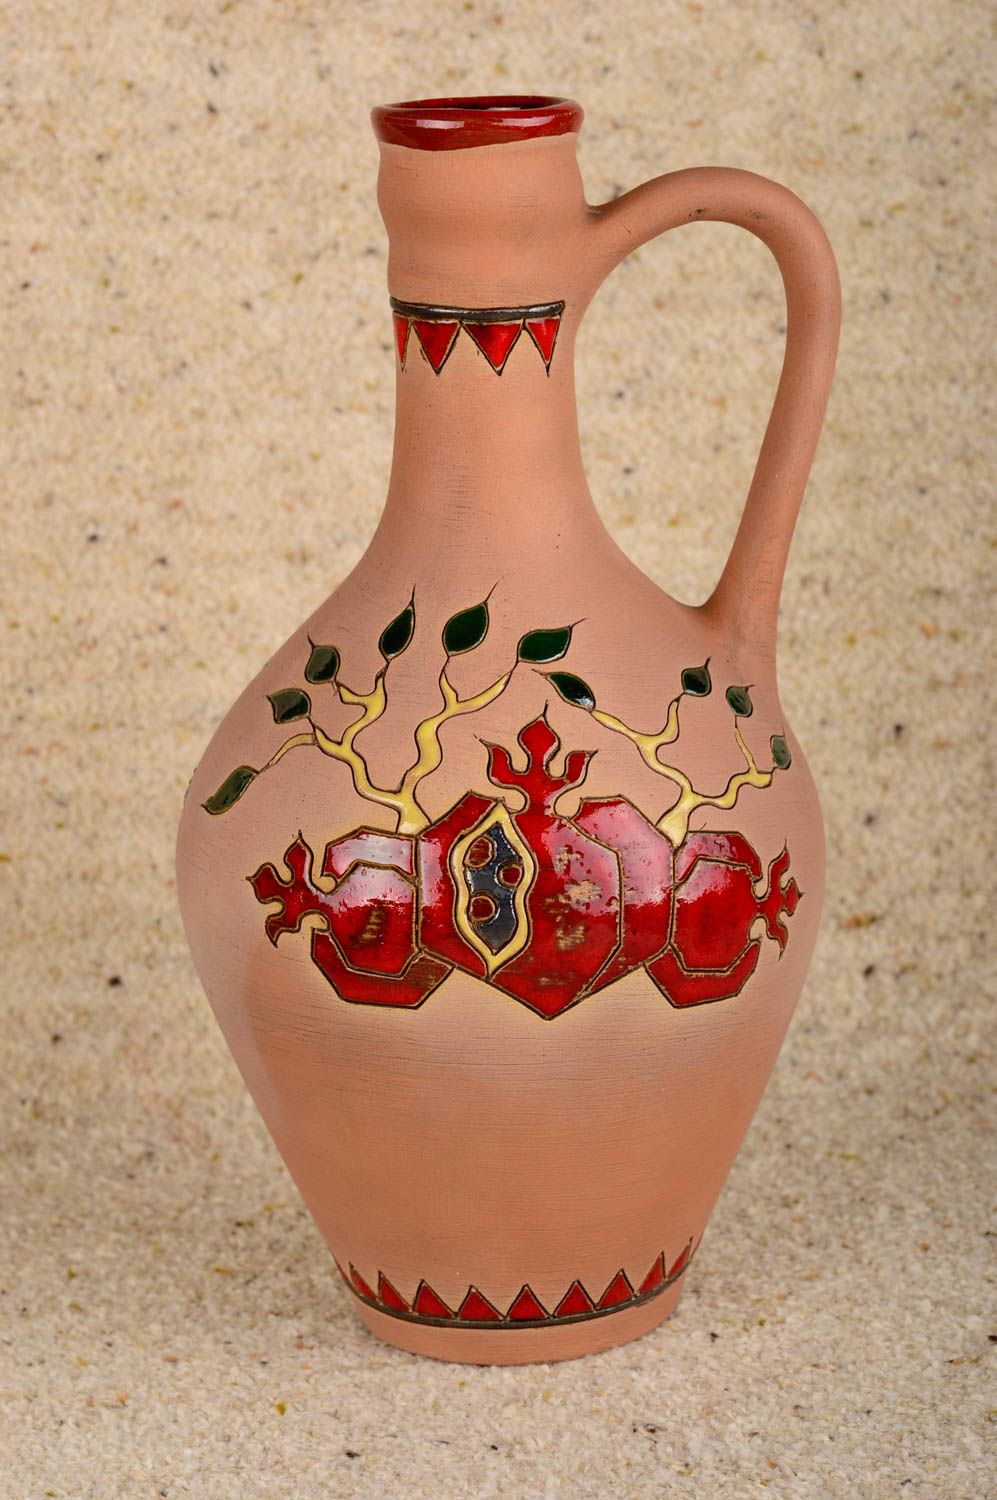 40 oz ceramic wine pitcher with hand-painted pattern 1,7 lb photo 1